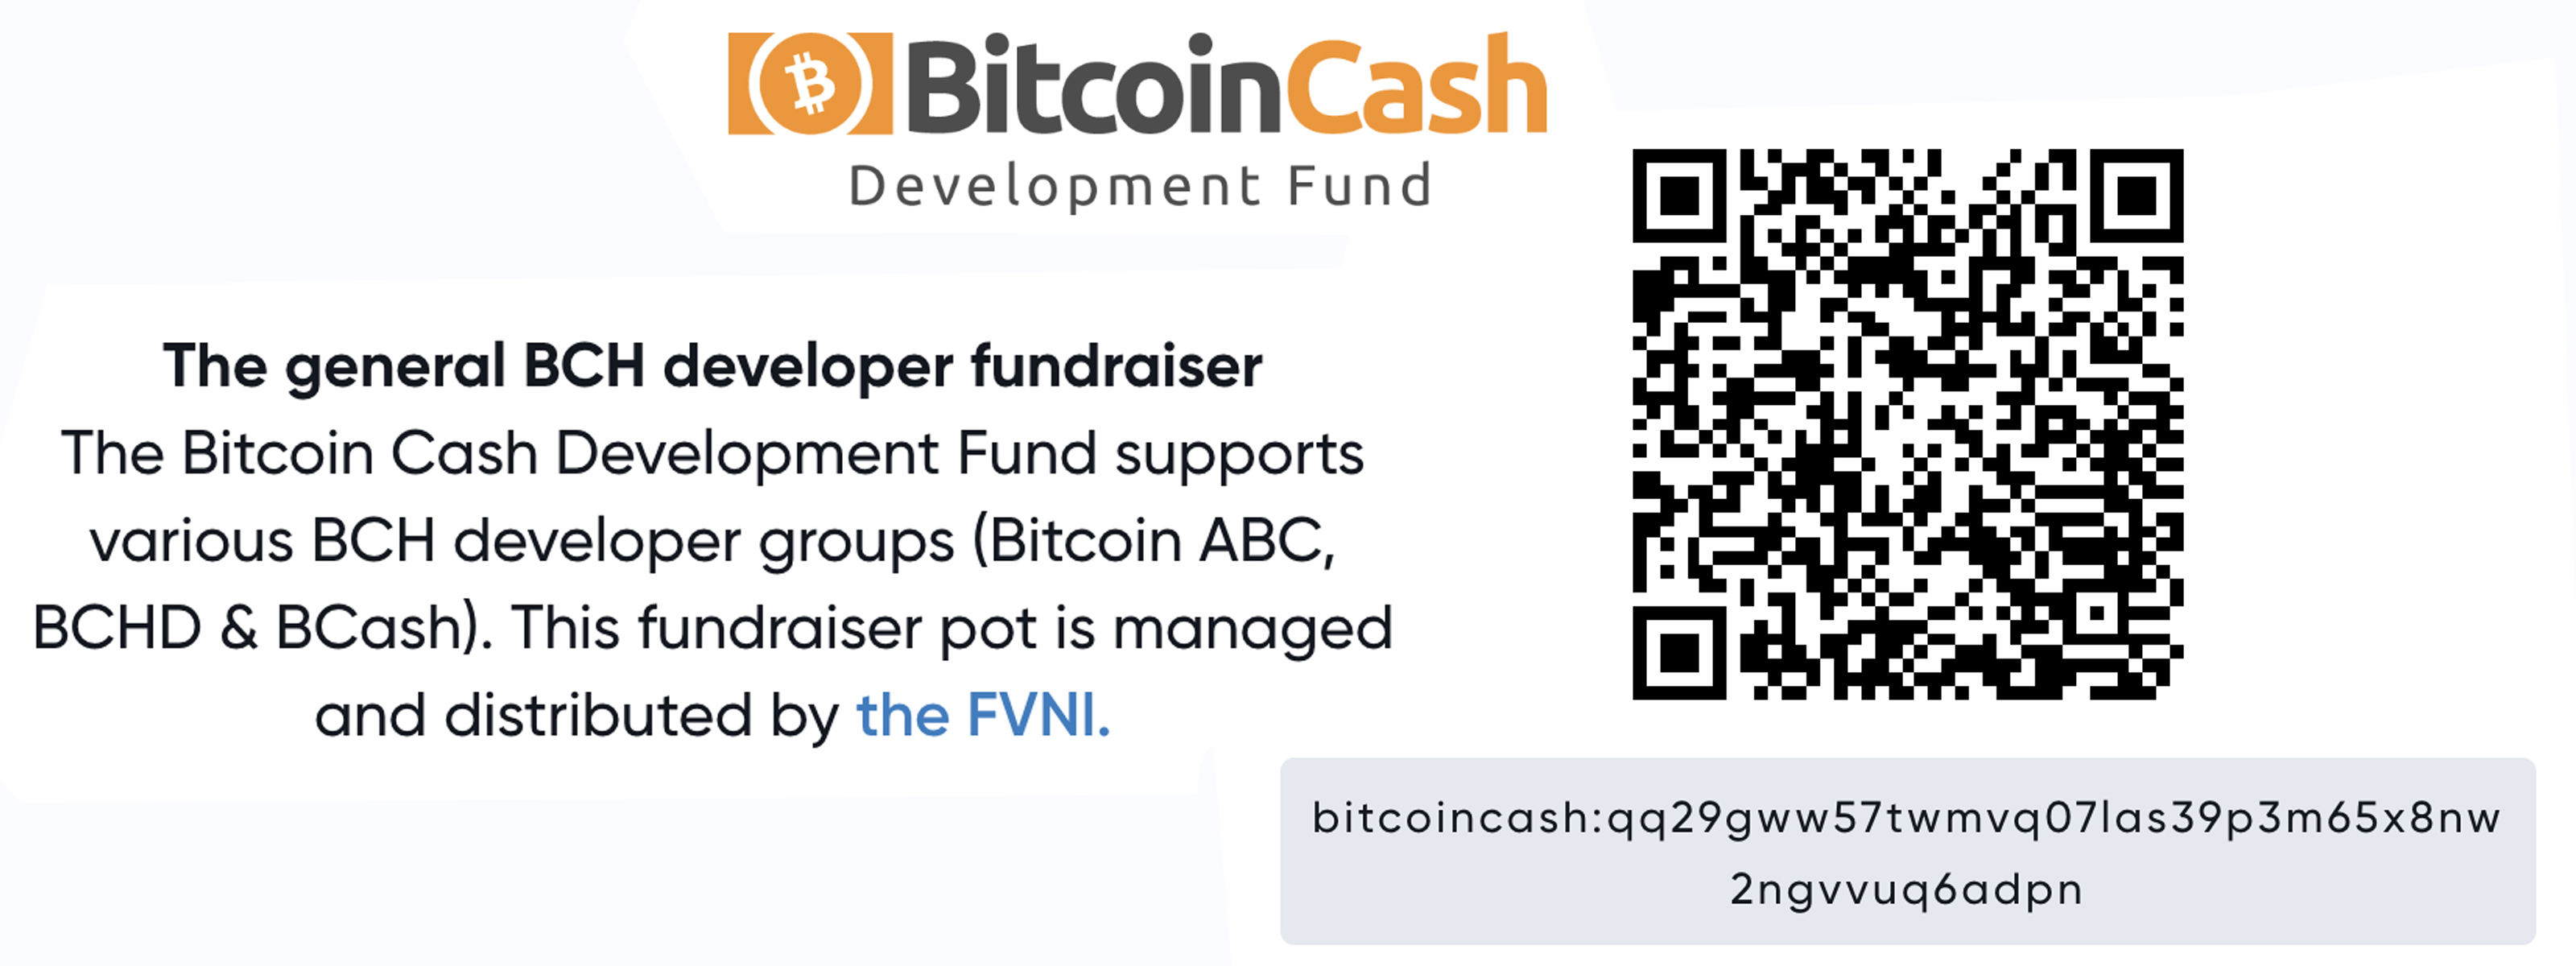 BCH Development Fund Doubles Its Goal After a Successful Month